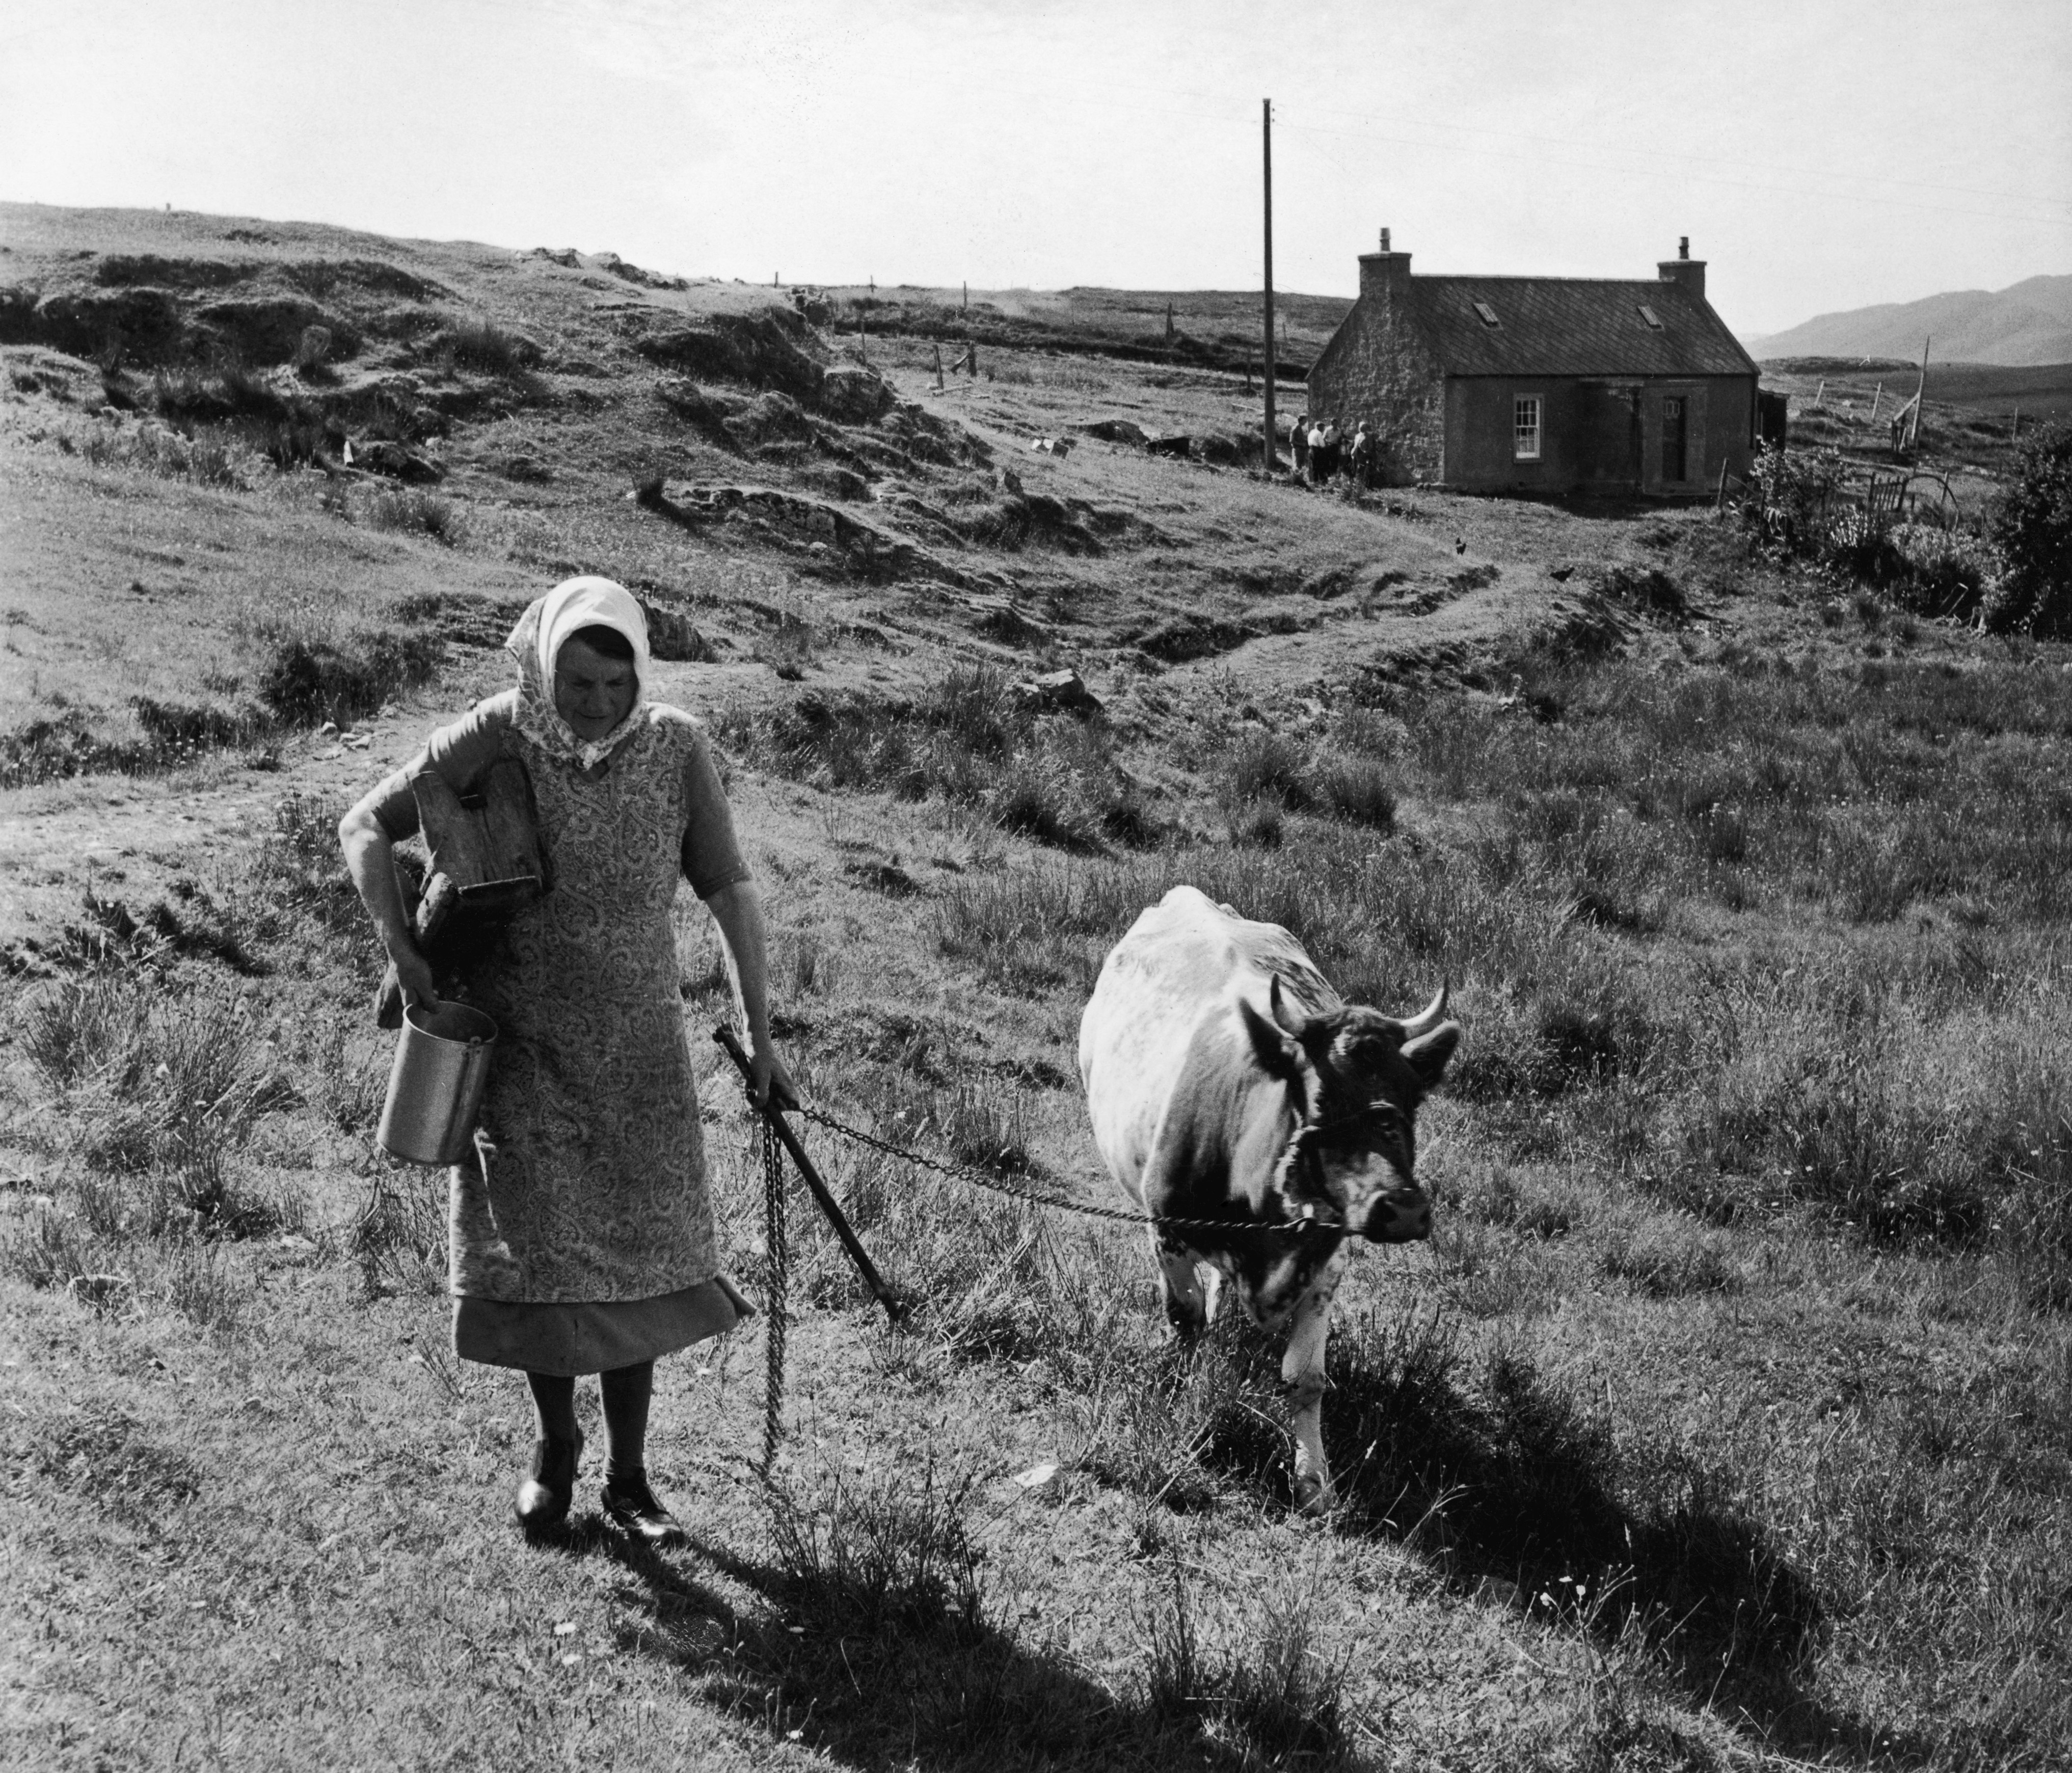 A woman leads her cow along a remote country track on the island of Lewis and Harris in the Outer Hebrides, September 3 1955. Original publication: Picture Post - 7967 - The Crofters' Isle - pub. 1955 (Photo by Bert Hardy/Picture Post/Hulton Archive/Getty Images)